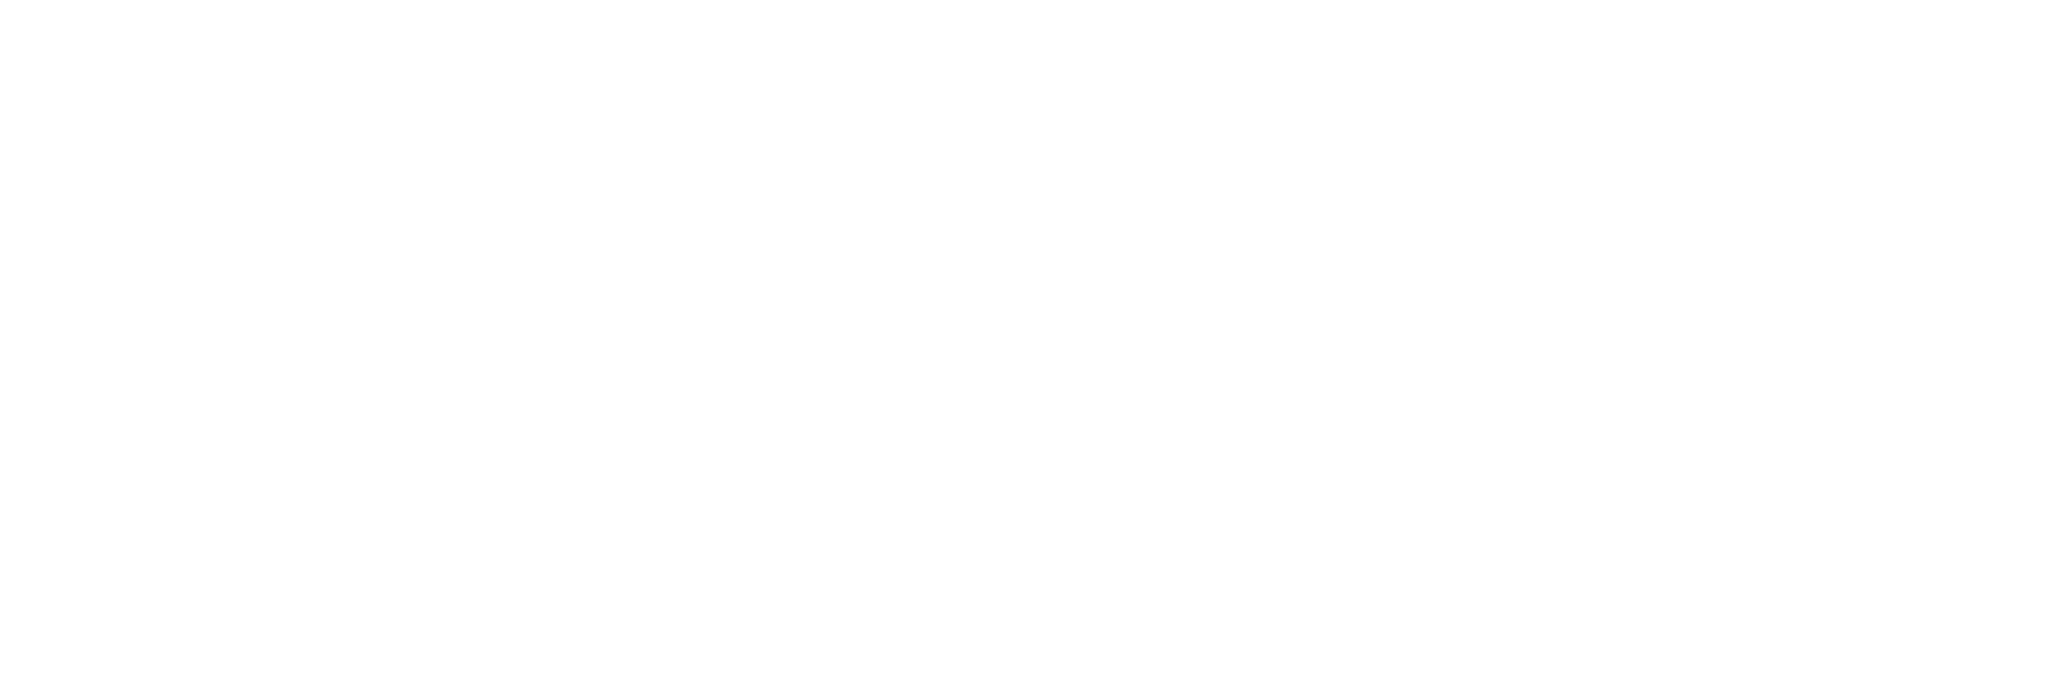 DressYourFace LIVE